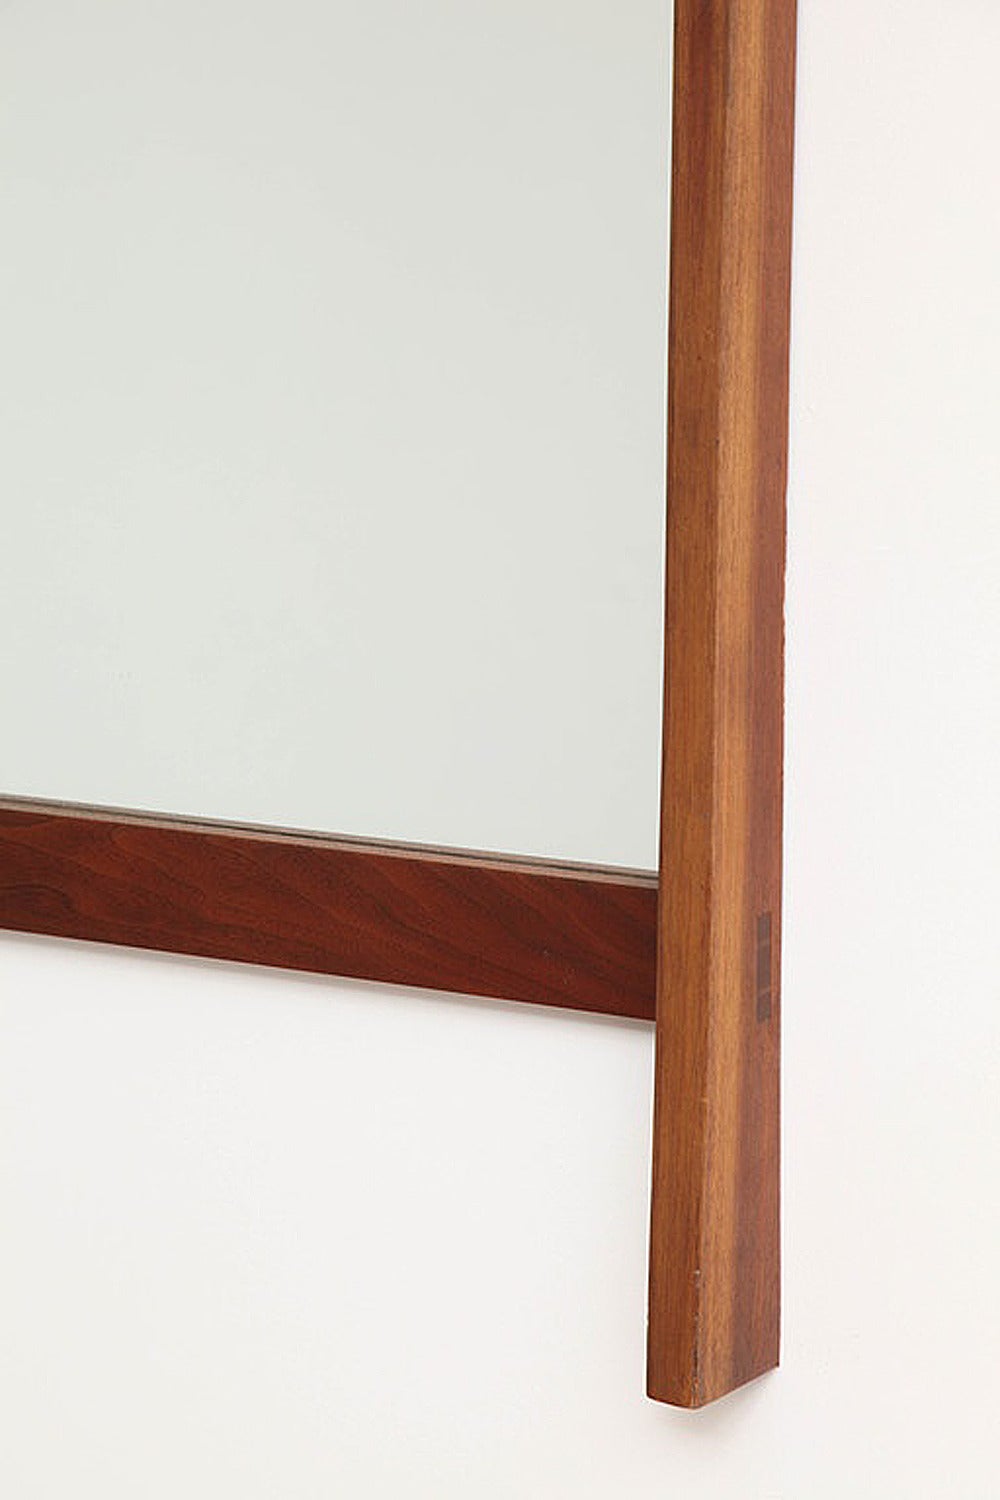 Mid-20th Century Wall Mirror by George Nakashima For Sale